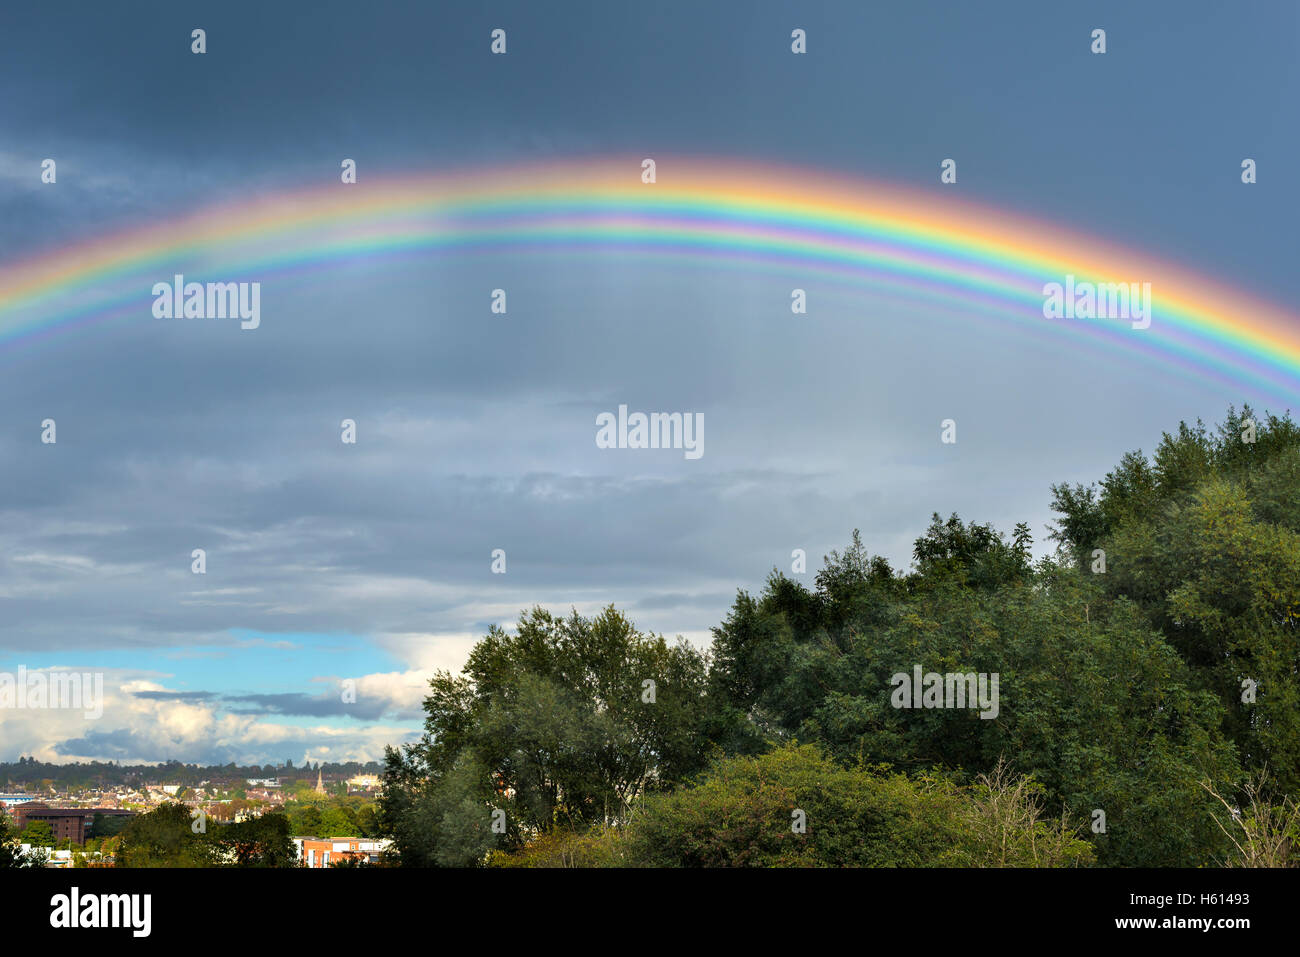 Rare and bizarre multiple rainbow over an English town Stock Photo